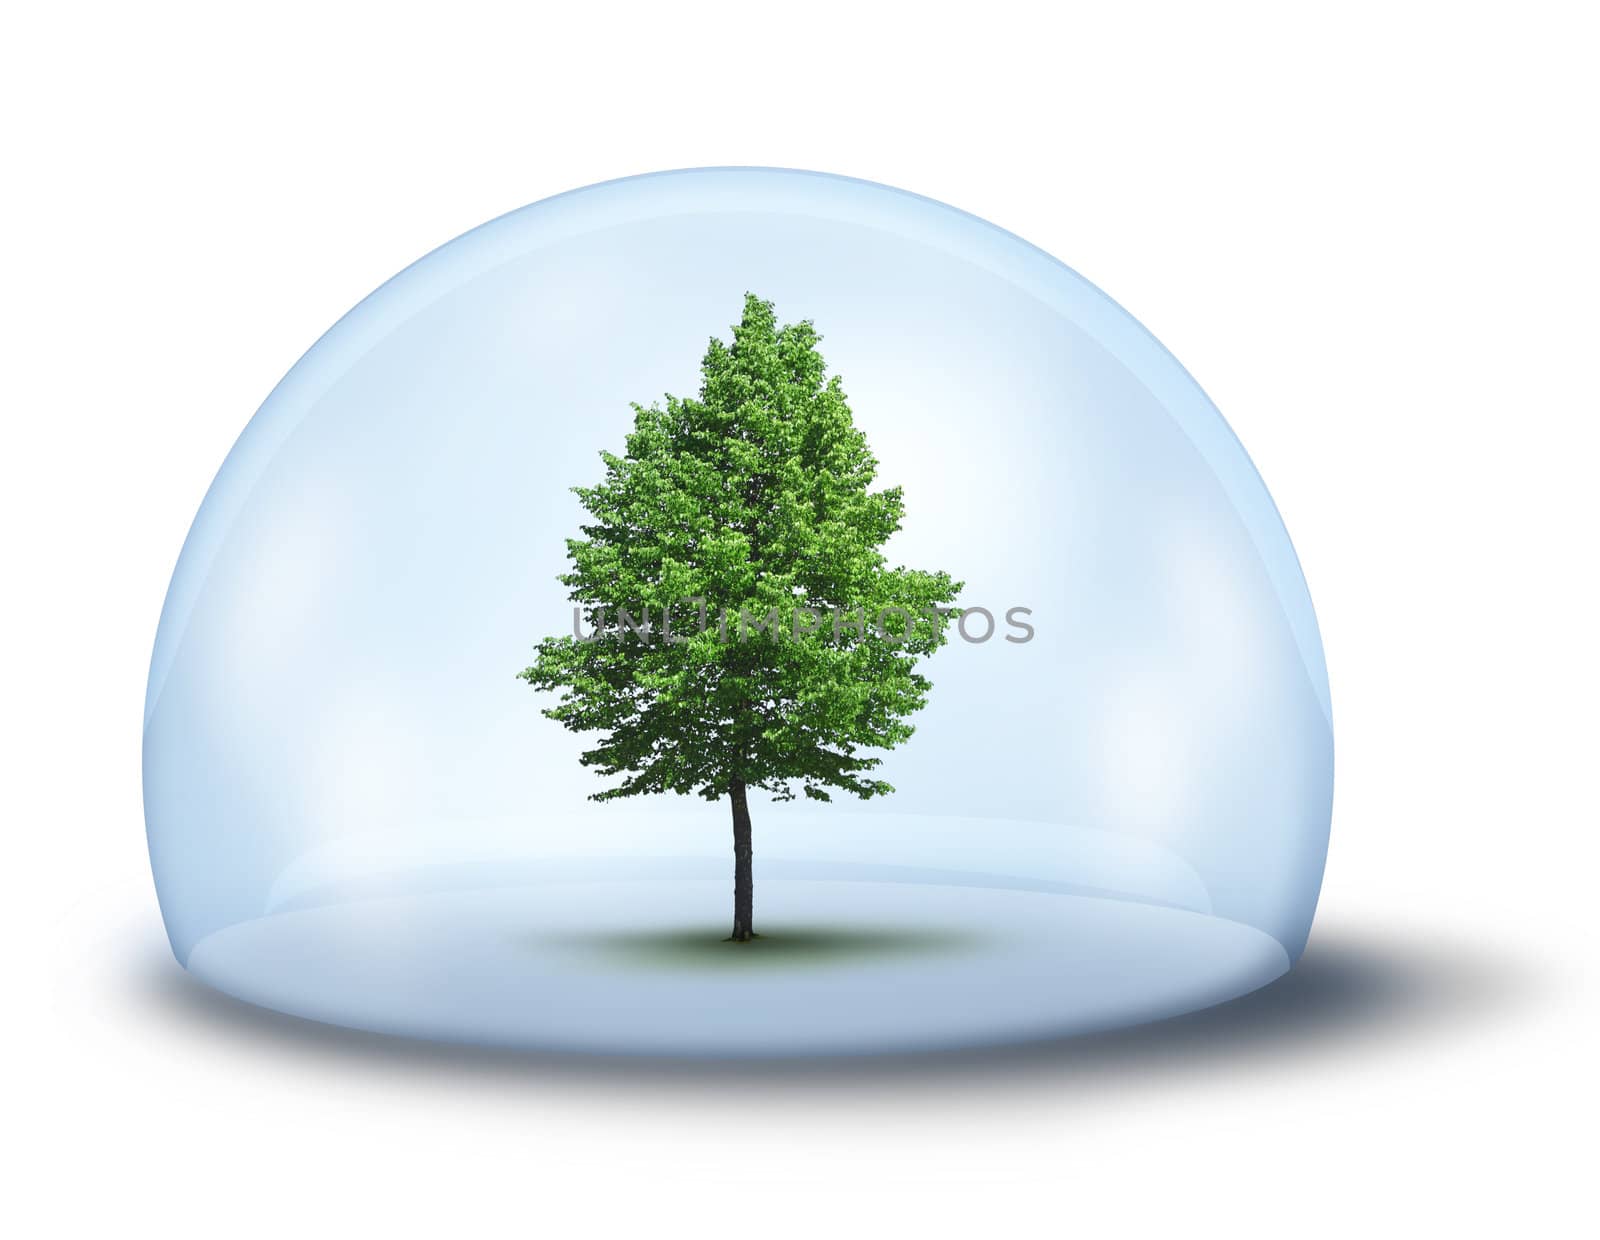 Green tree in glass cupola,  environmental concept